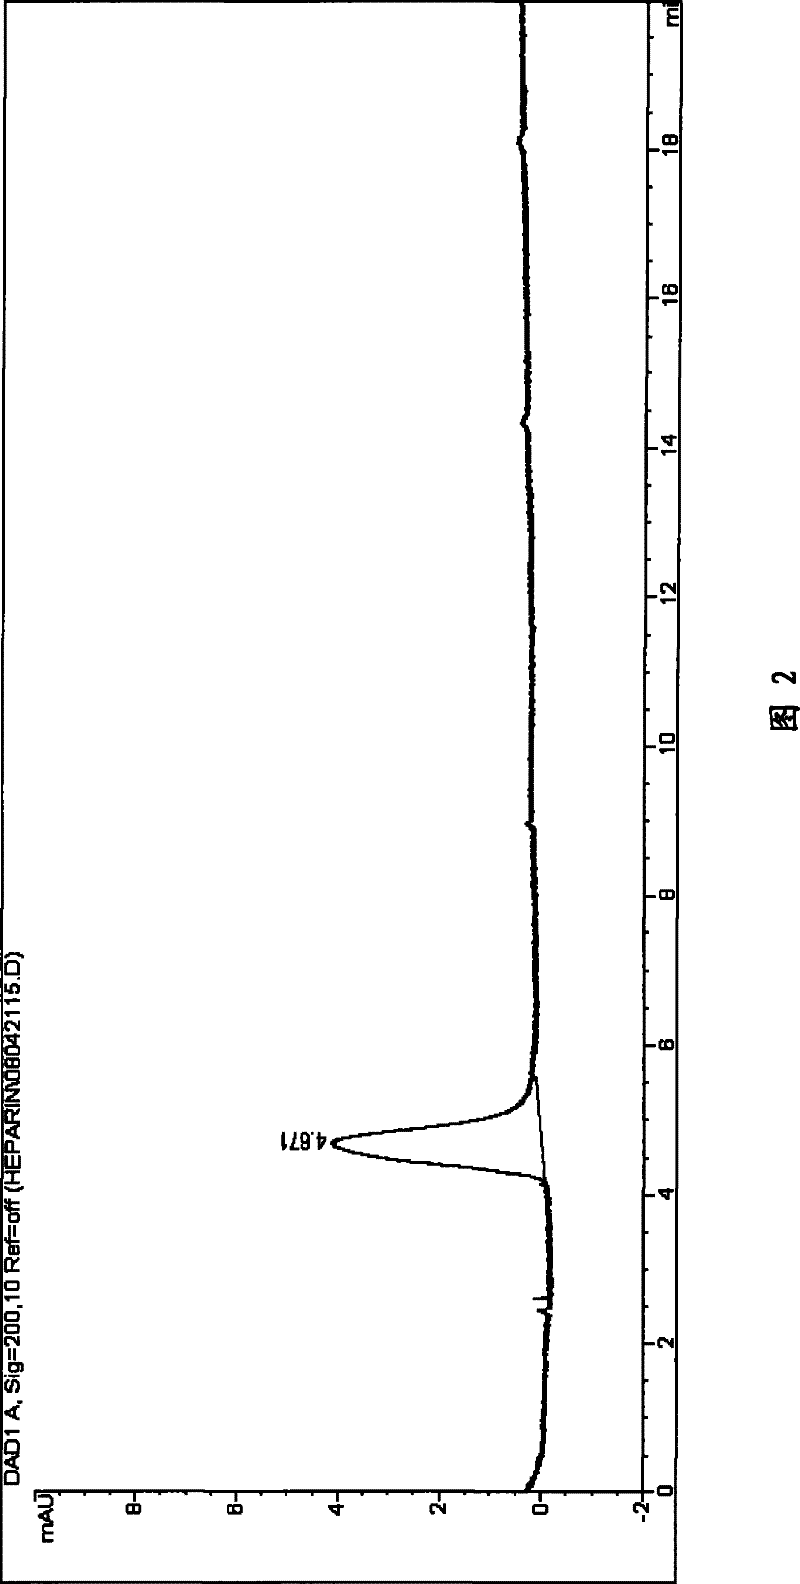 Method for separating chondroitin polysulfate from heparin sodium by extraction method